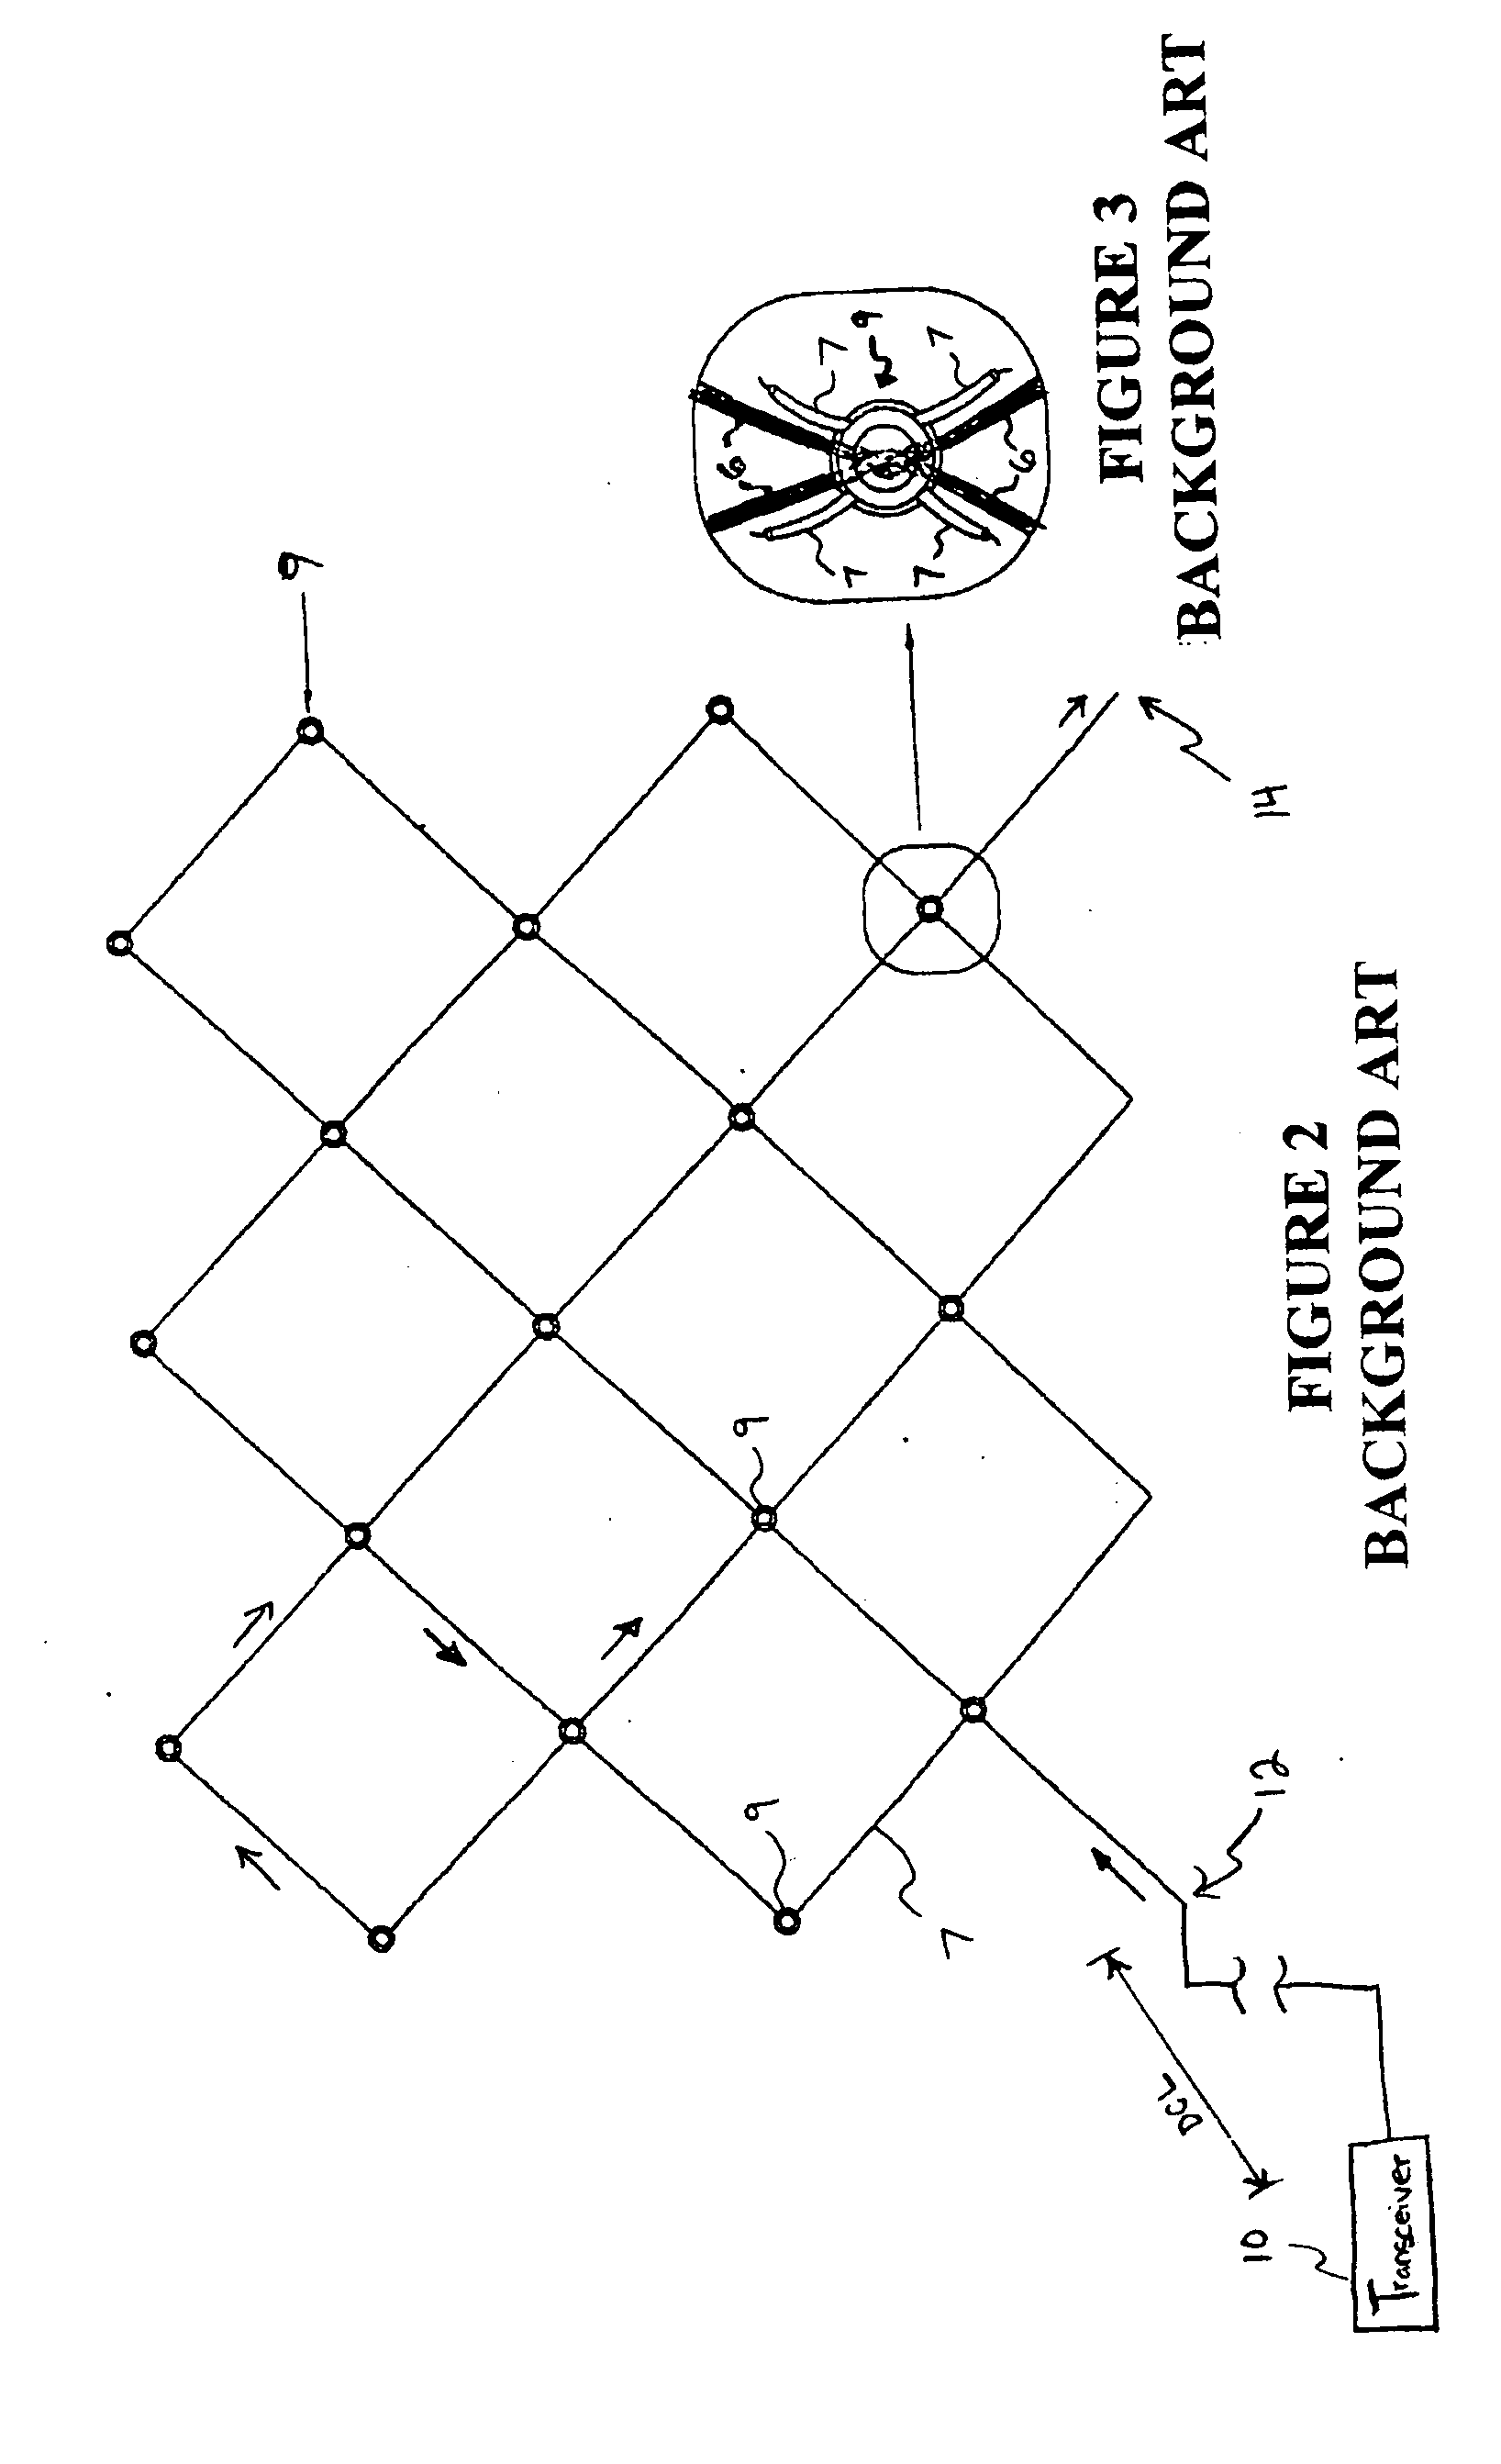 Apparatus and method to detect an intrusion point along a security fence